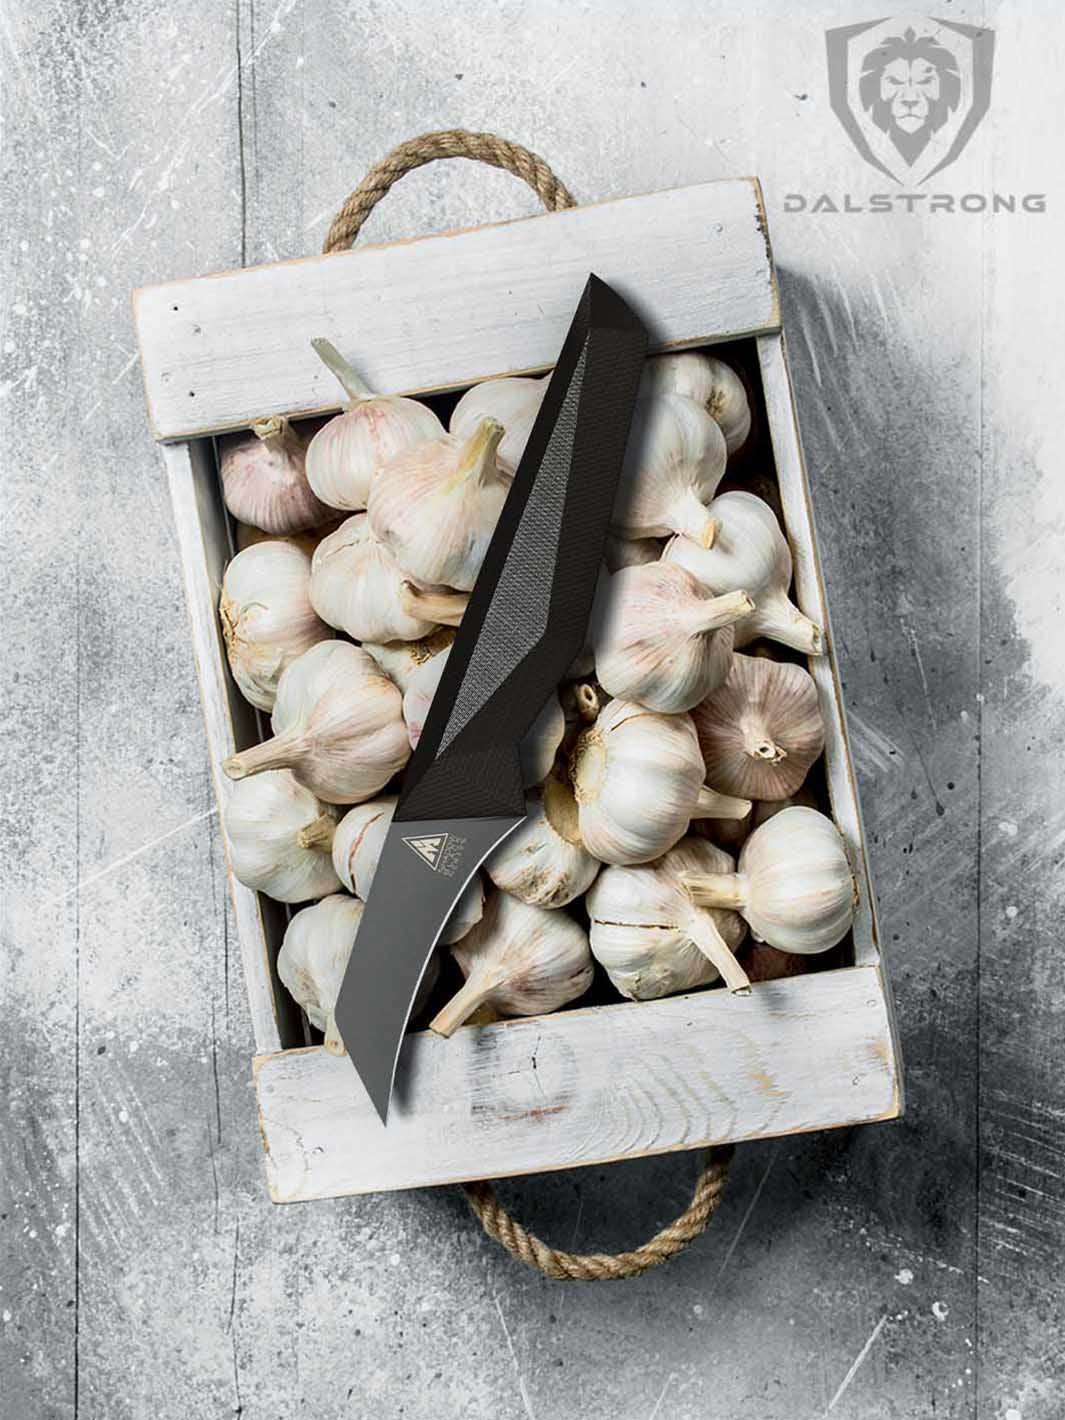 Dalstrong shadow black series 2.75 inch bird's beak paring knife with garlic cloves insise a wooden box.